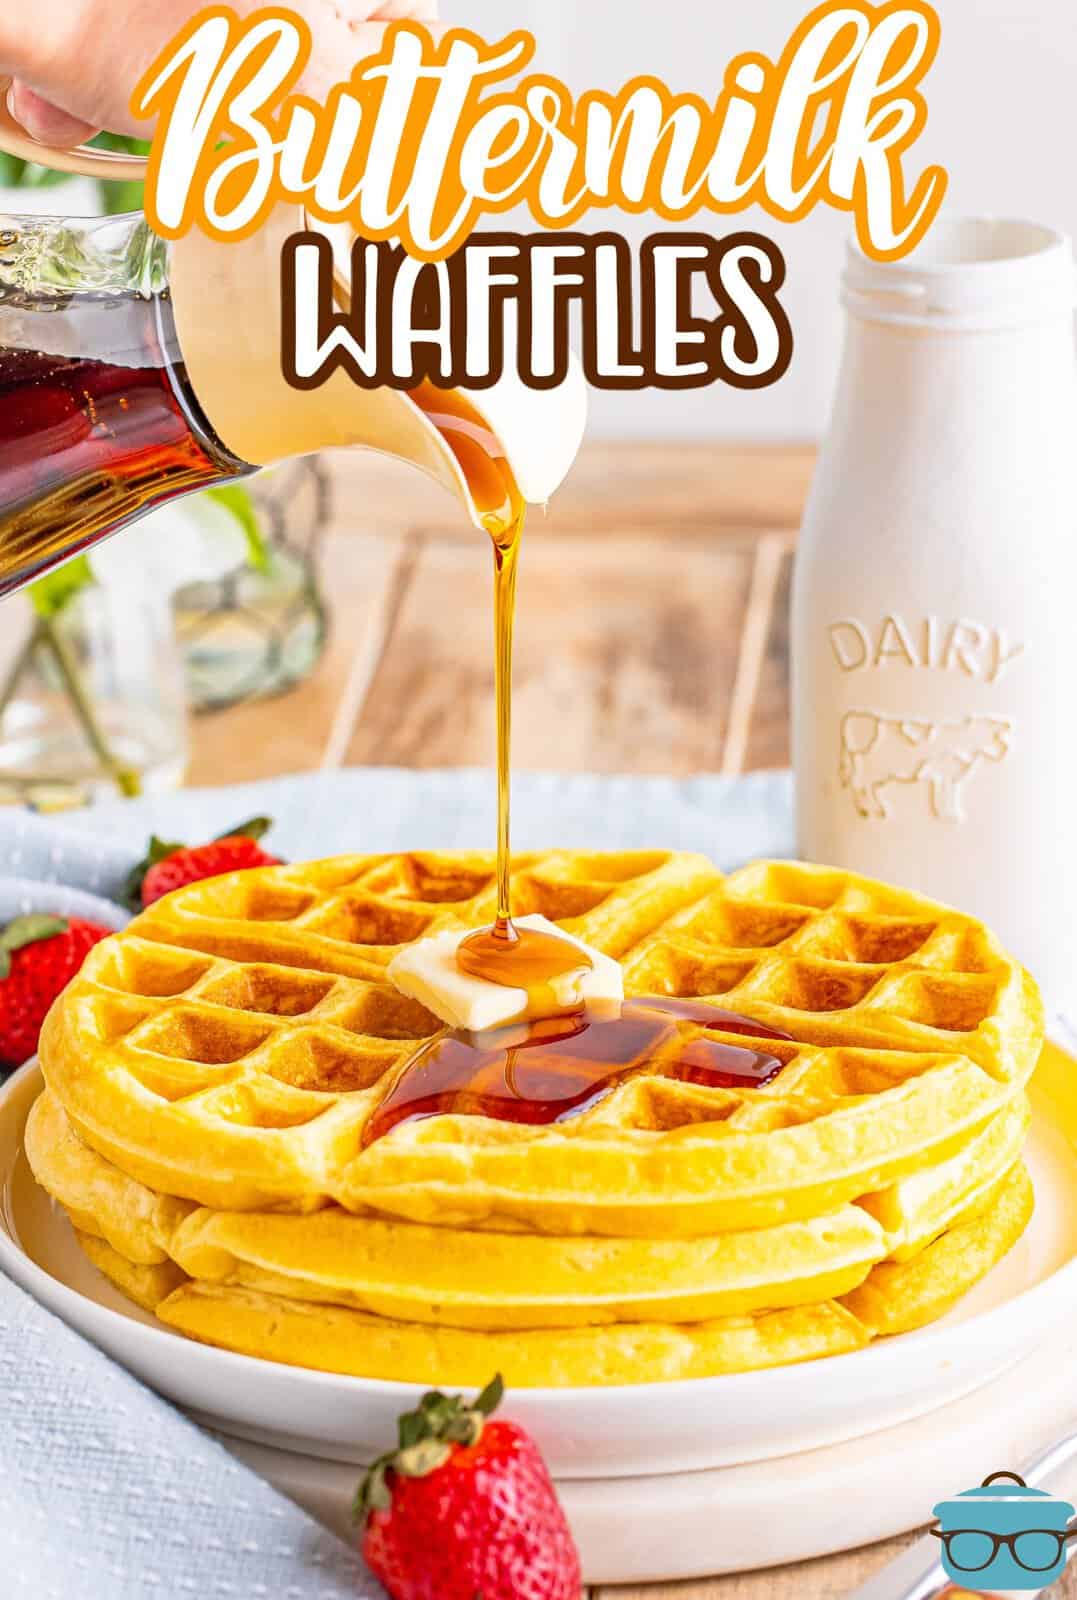 Syrup being poured on a small stack of buttermilk waffles.